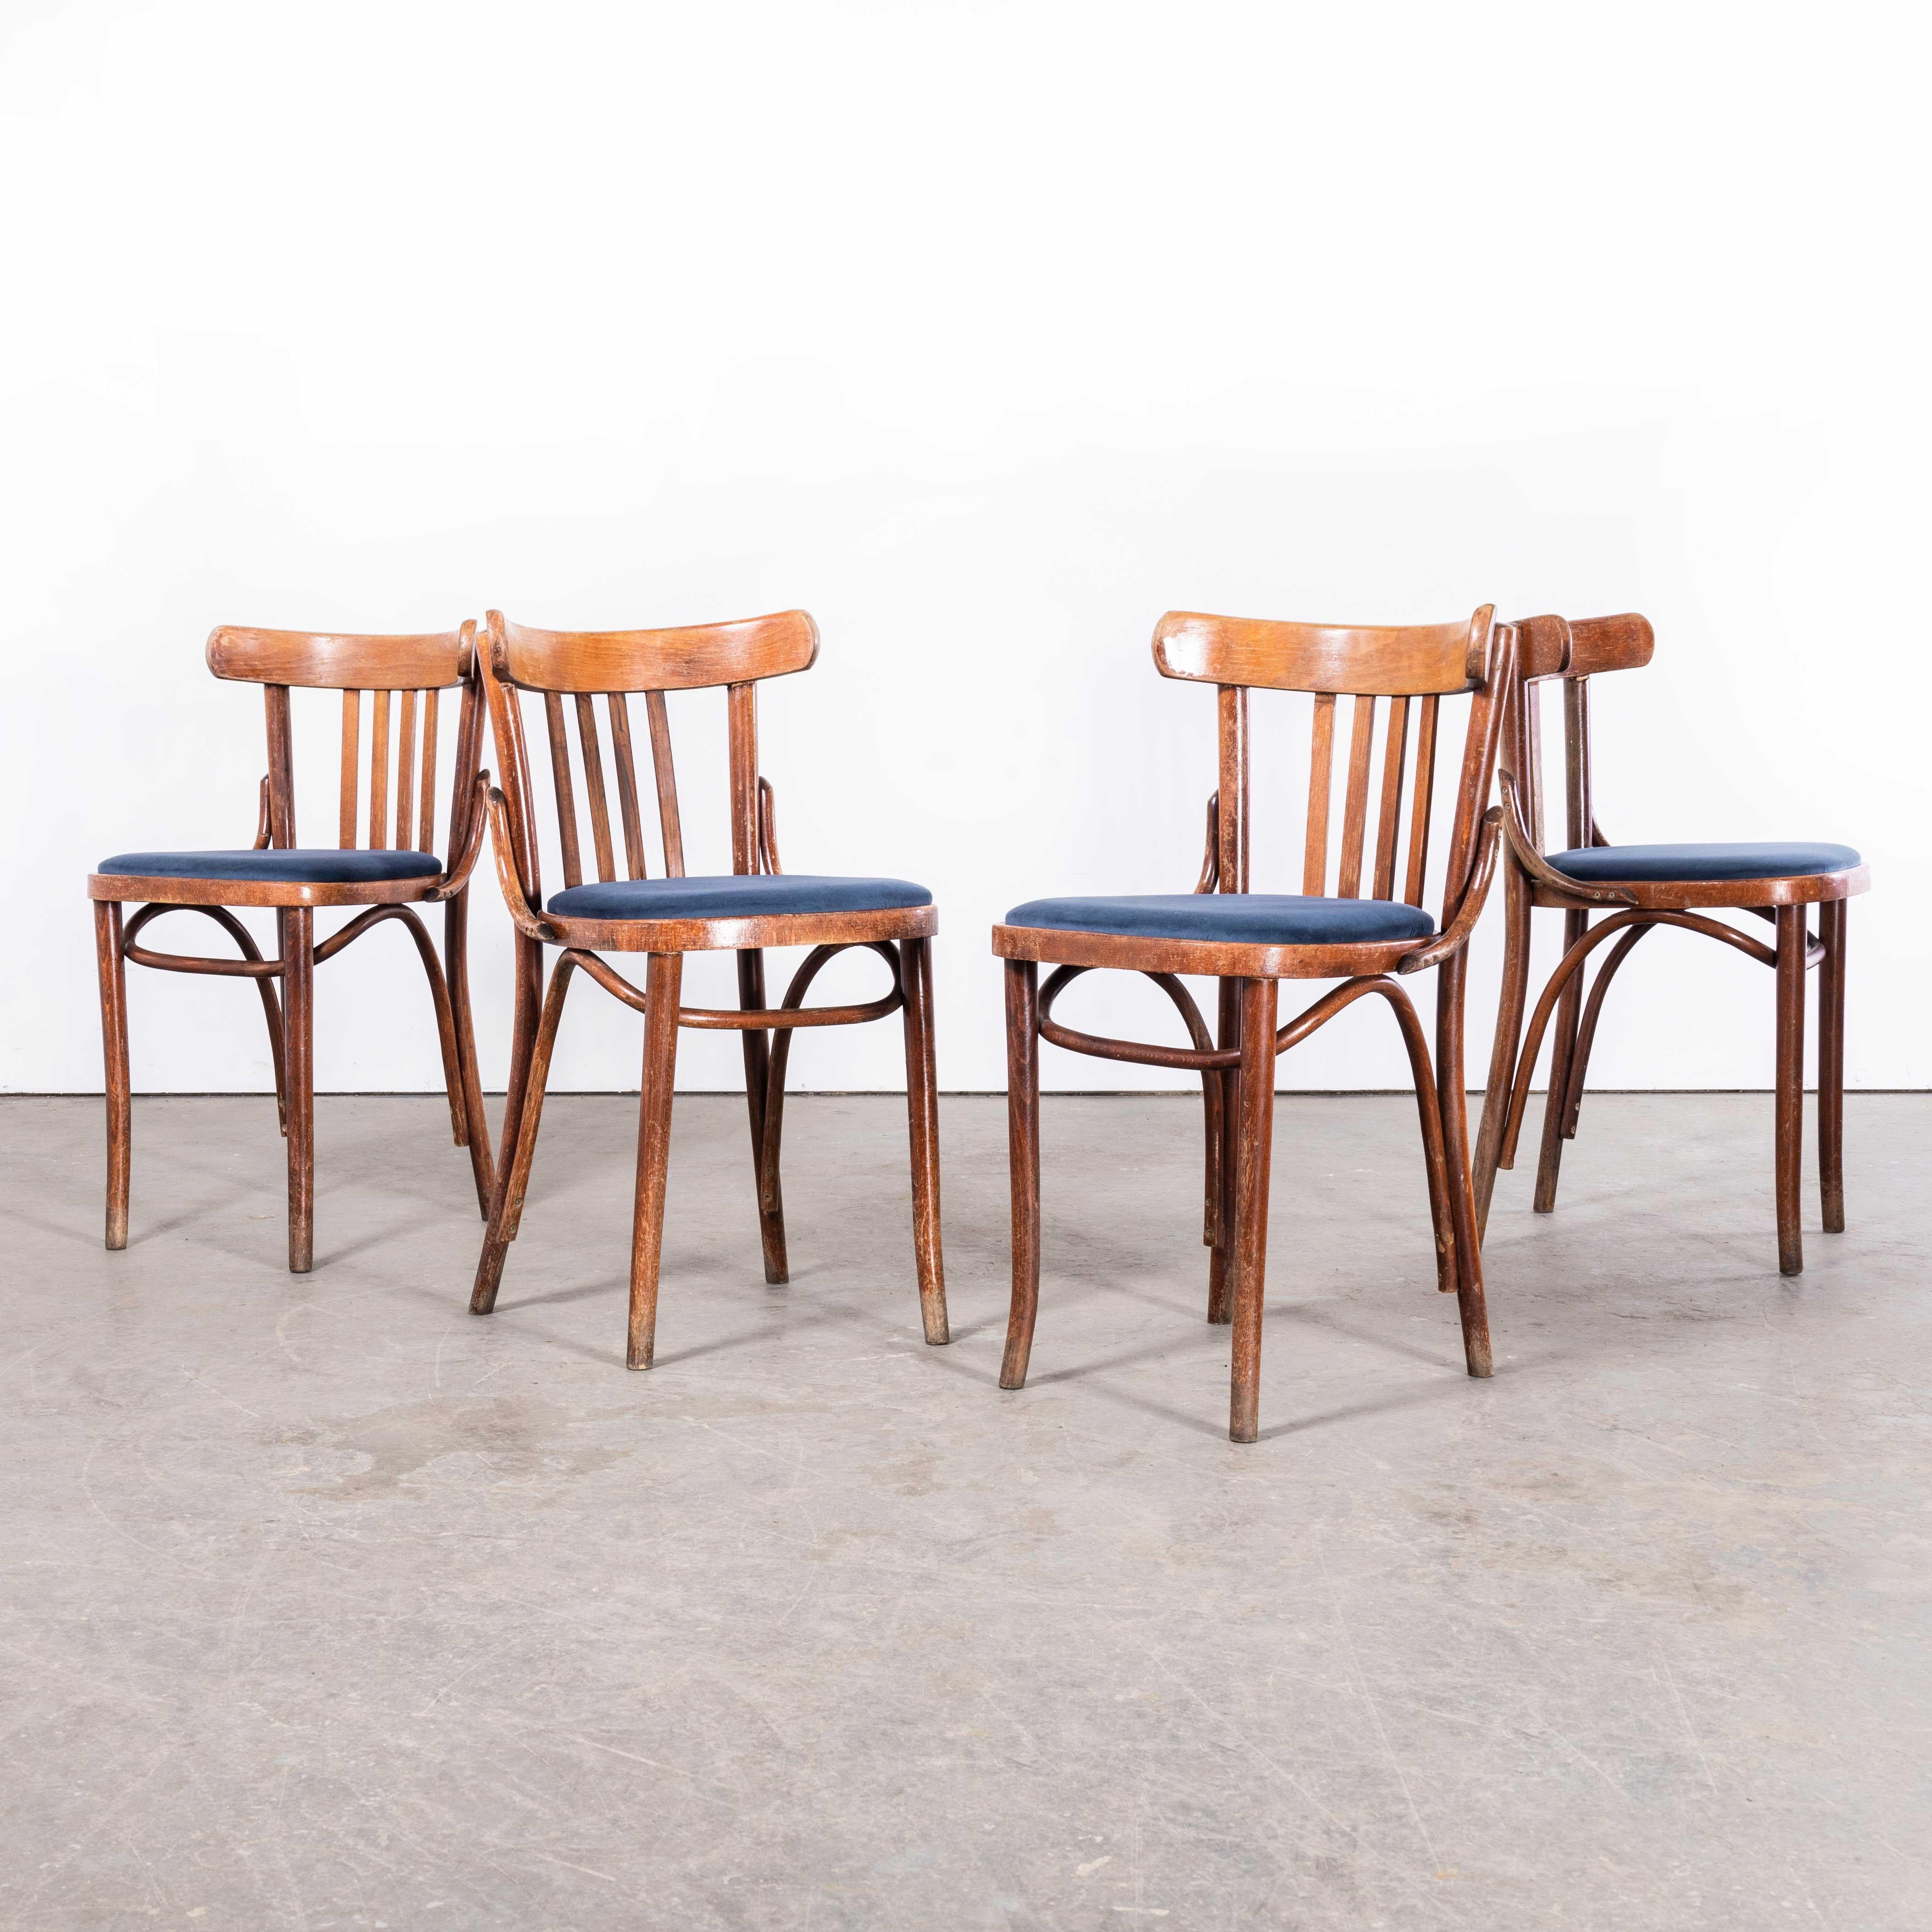 1960’s Classic Bentwood Upholstered Upholstered Bistro Chairs – Set Of Four
1960’s Classic Bentwood Upholstered Bistro Chairs – Set Of Four. Good quality set of four classic upholstered bentwood chairs with a rich colour. The chairs were made in